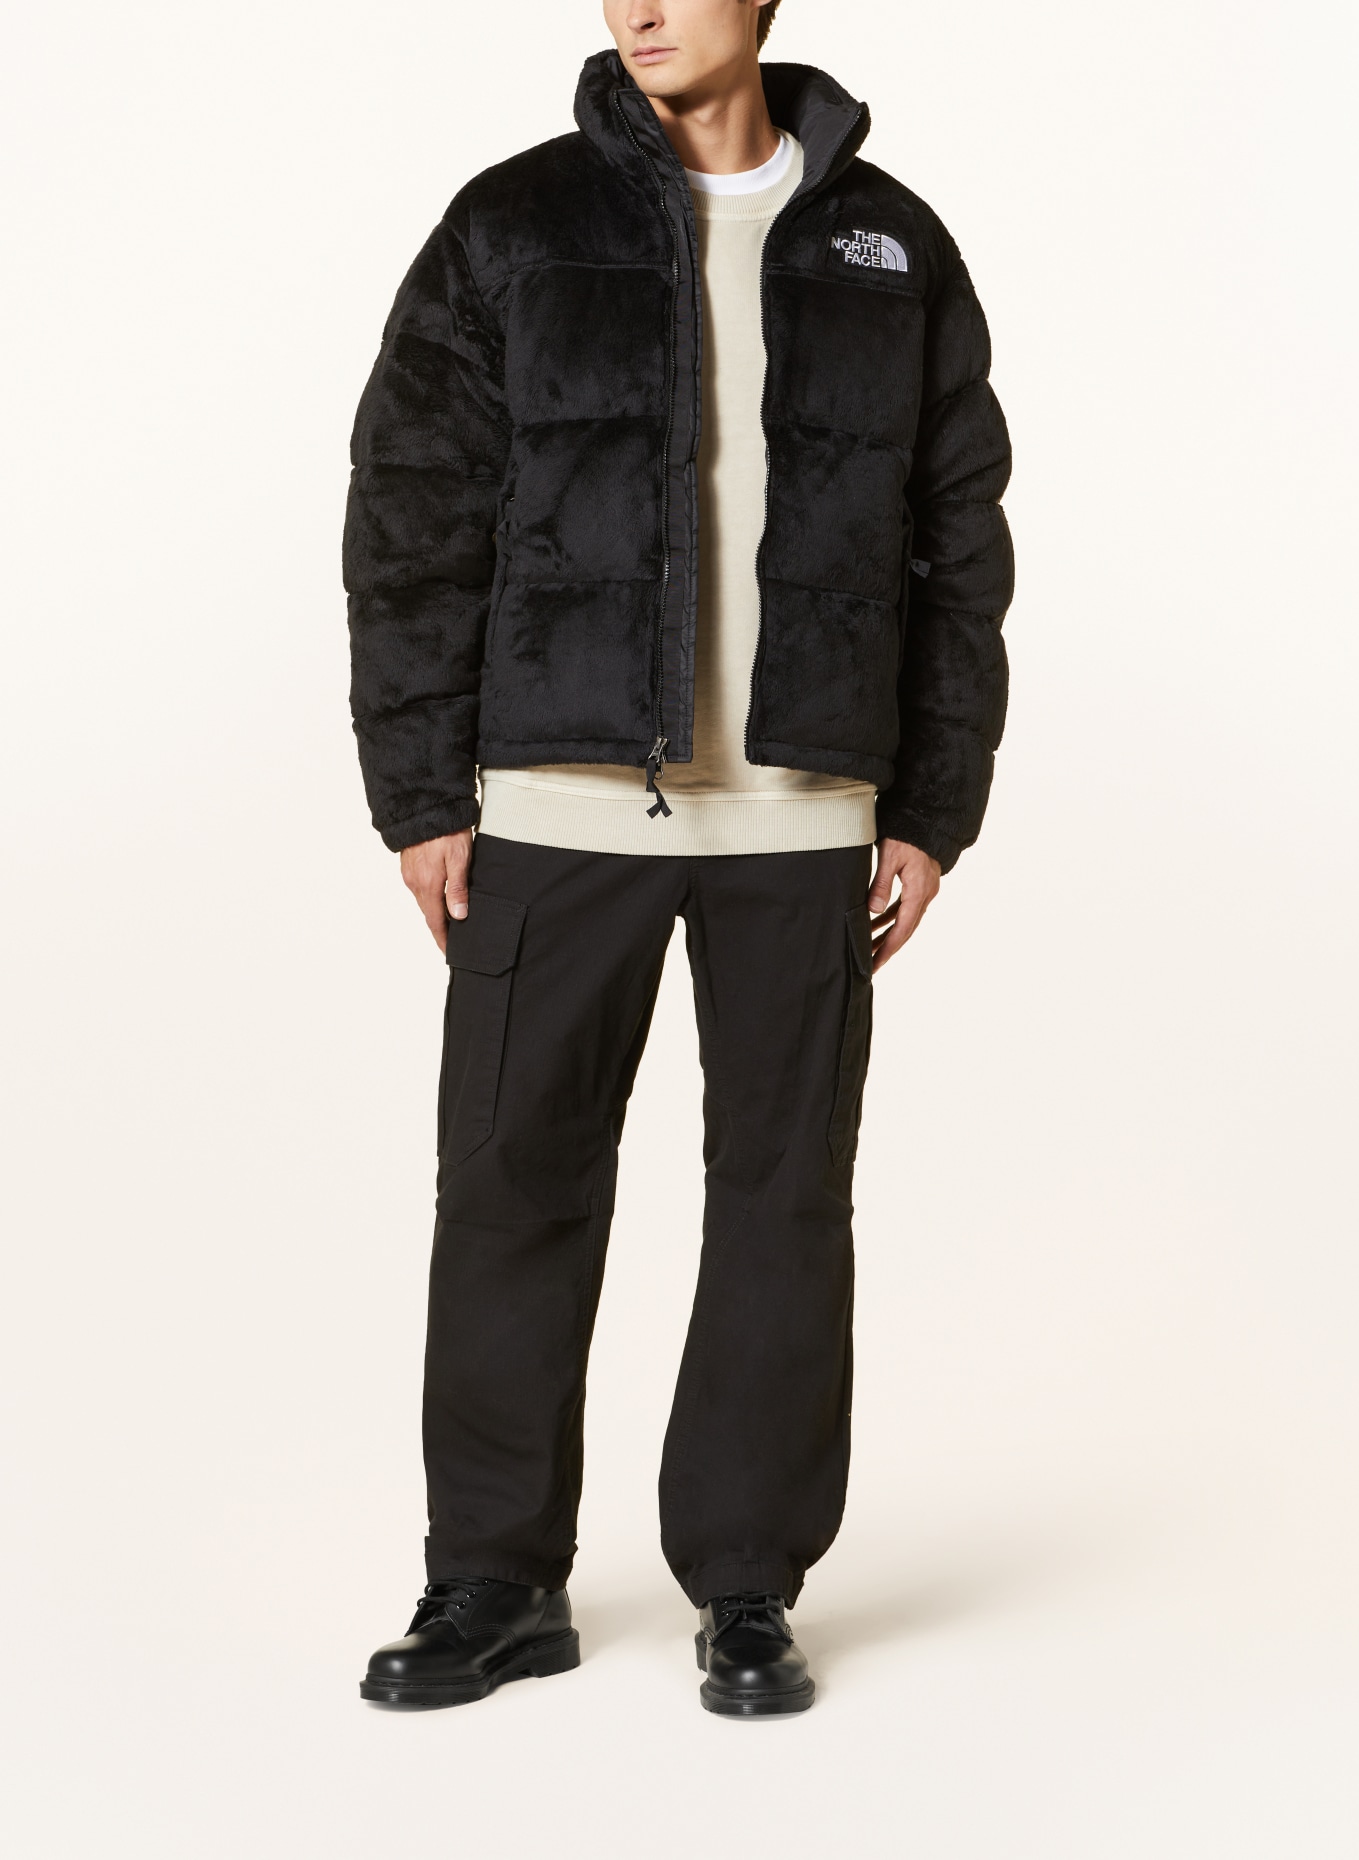 THE NORTH Down black FACE VERSA jacket in